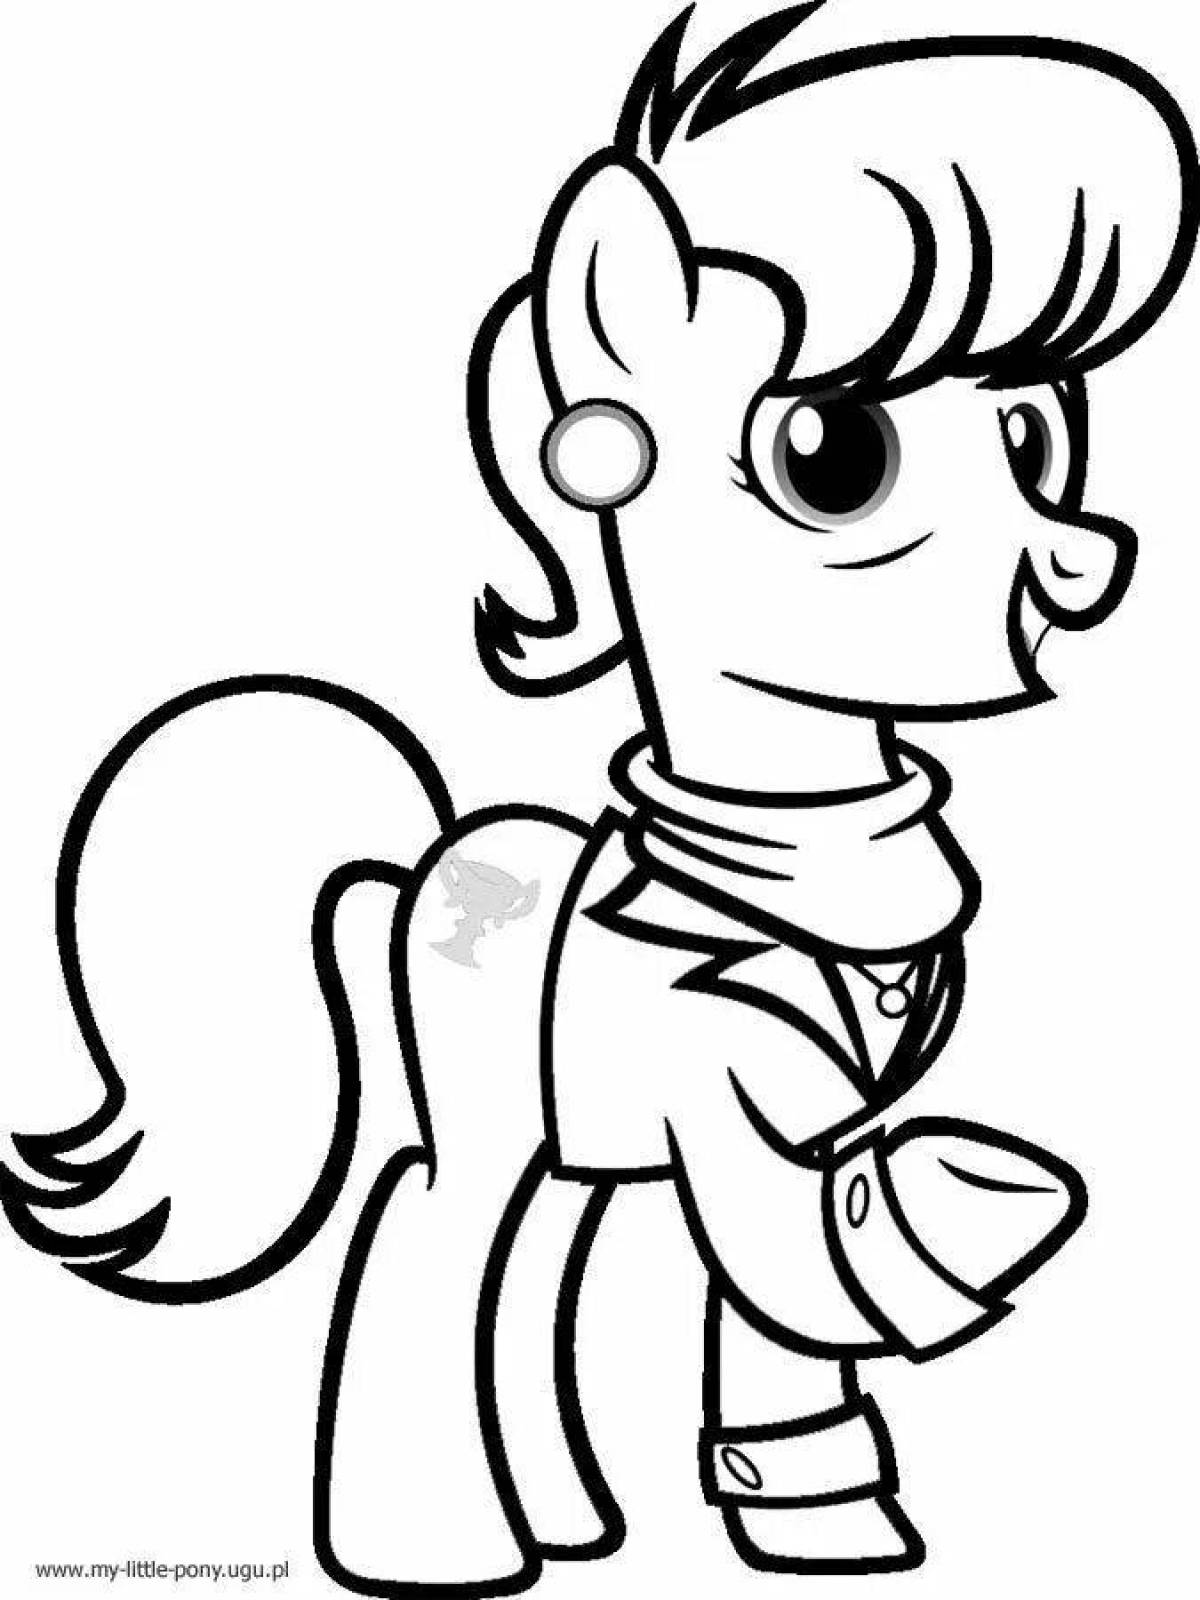 Fairytale pony play time coloring page